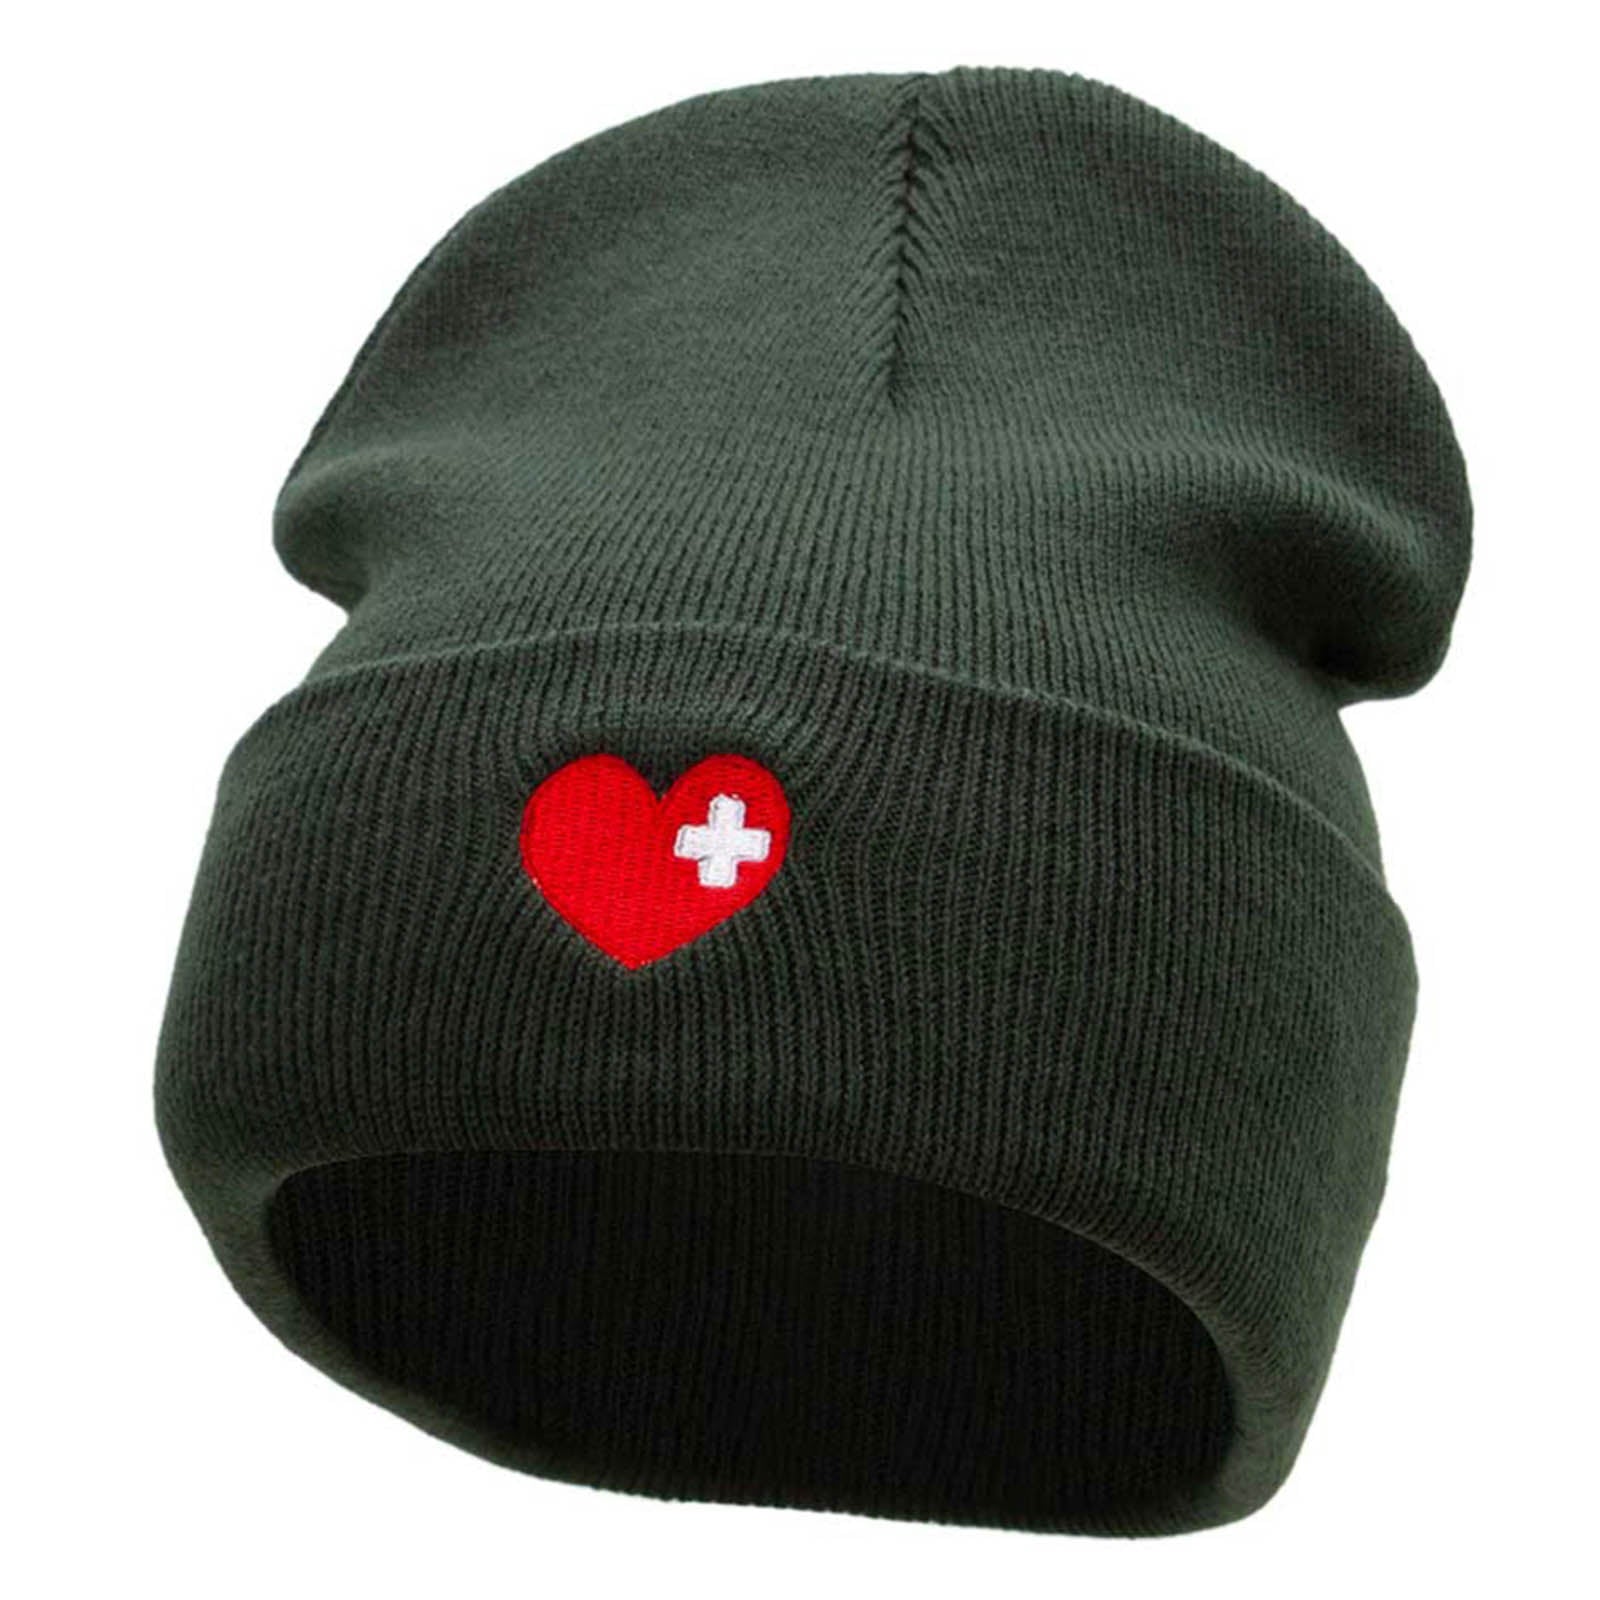 Medical Love Embroidered 12 Inch Long Knitted Beanie - Olive OSFM